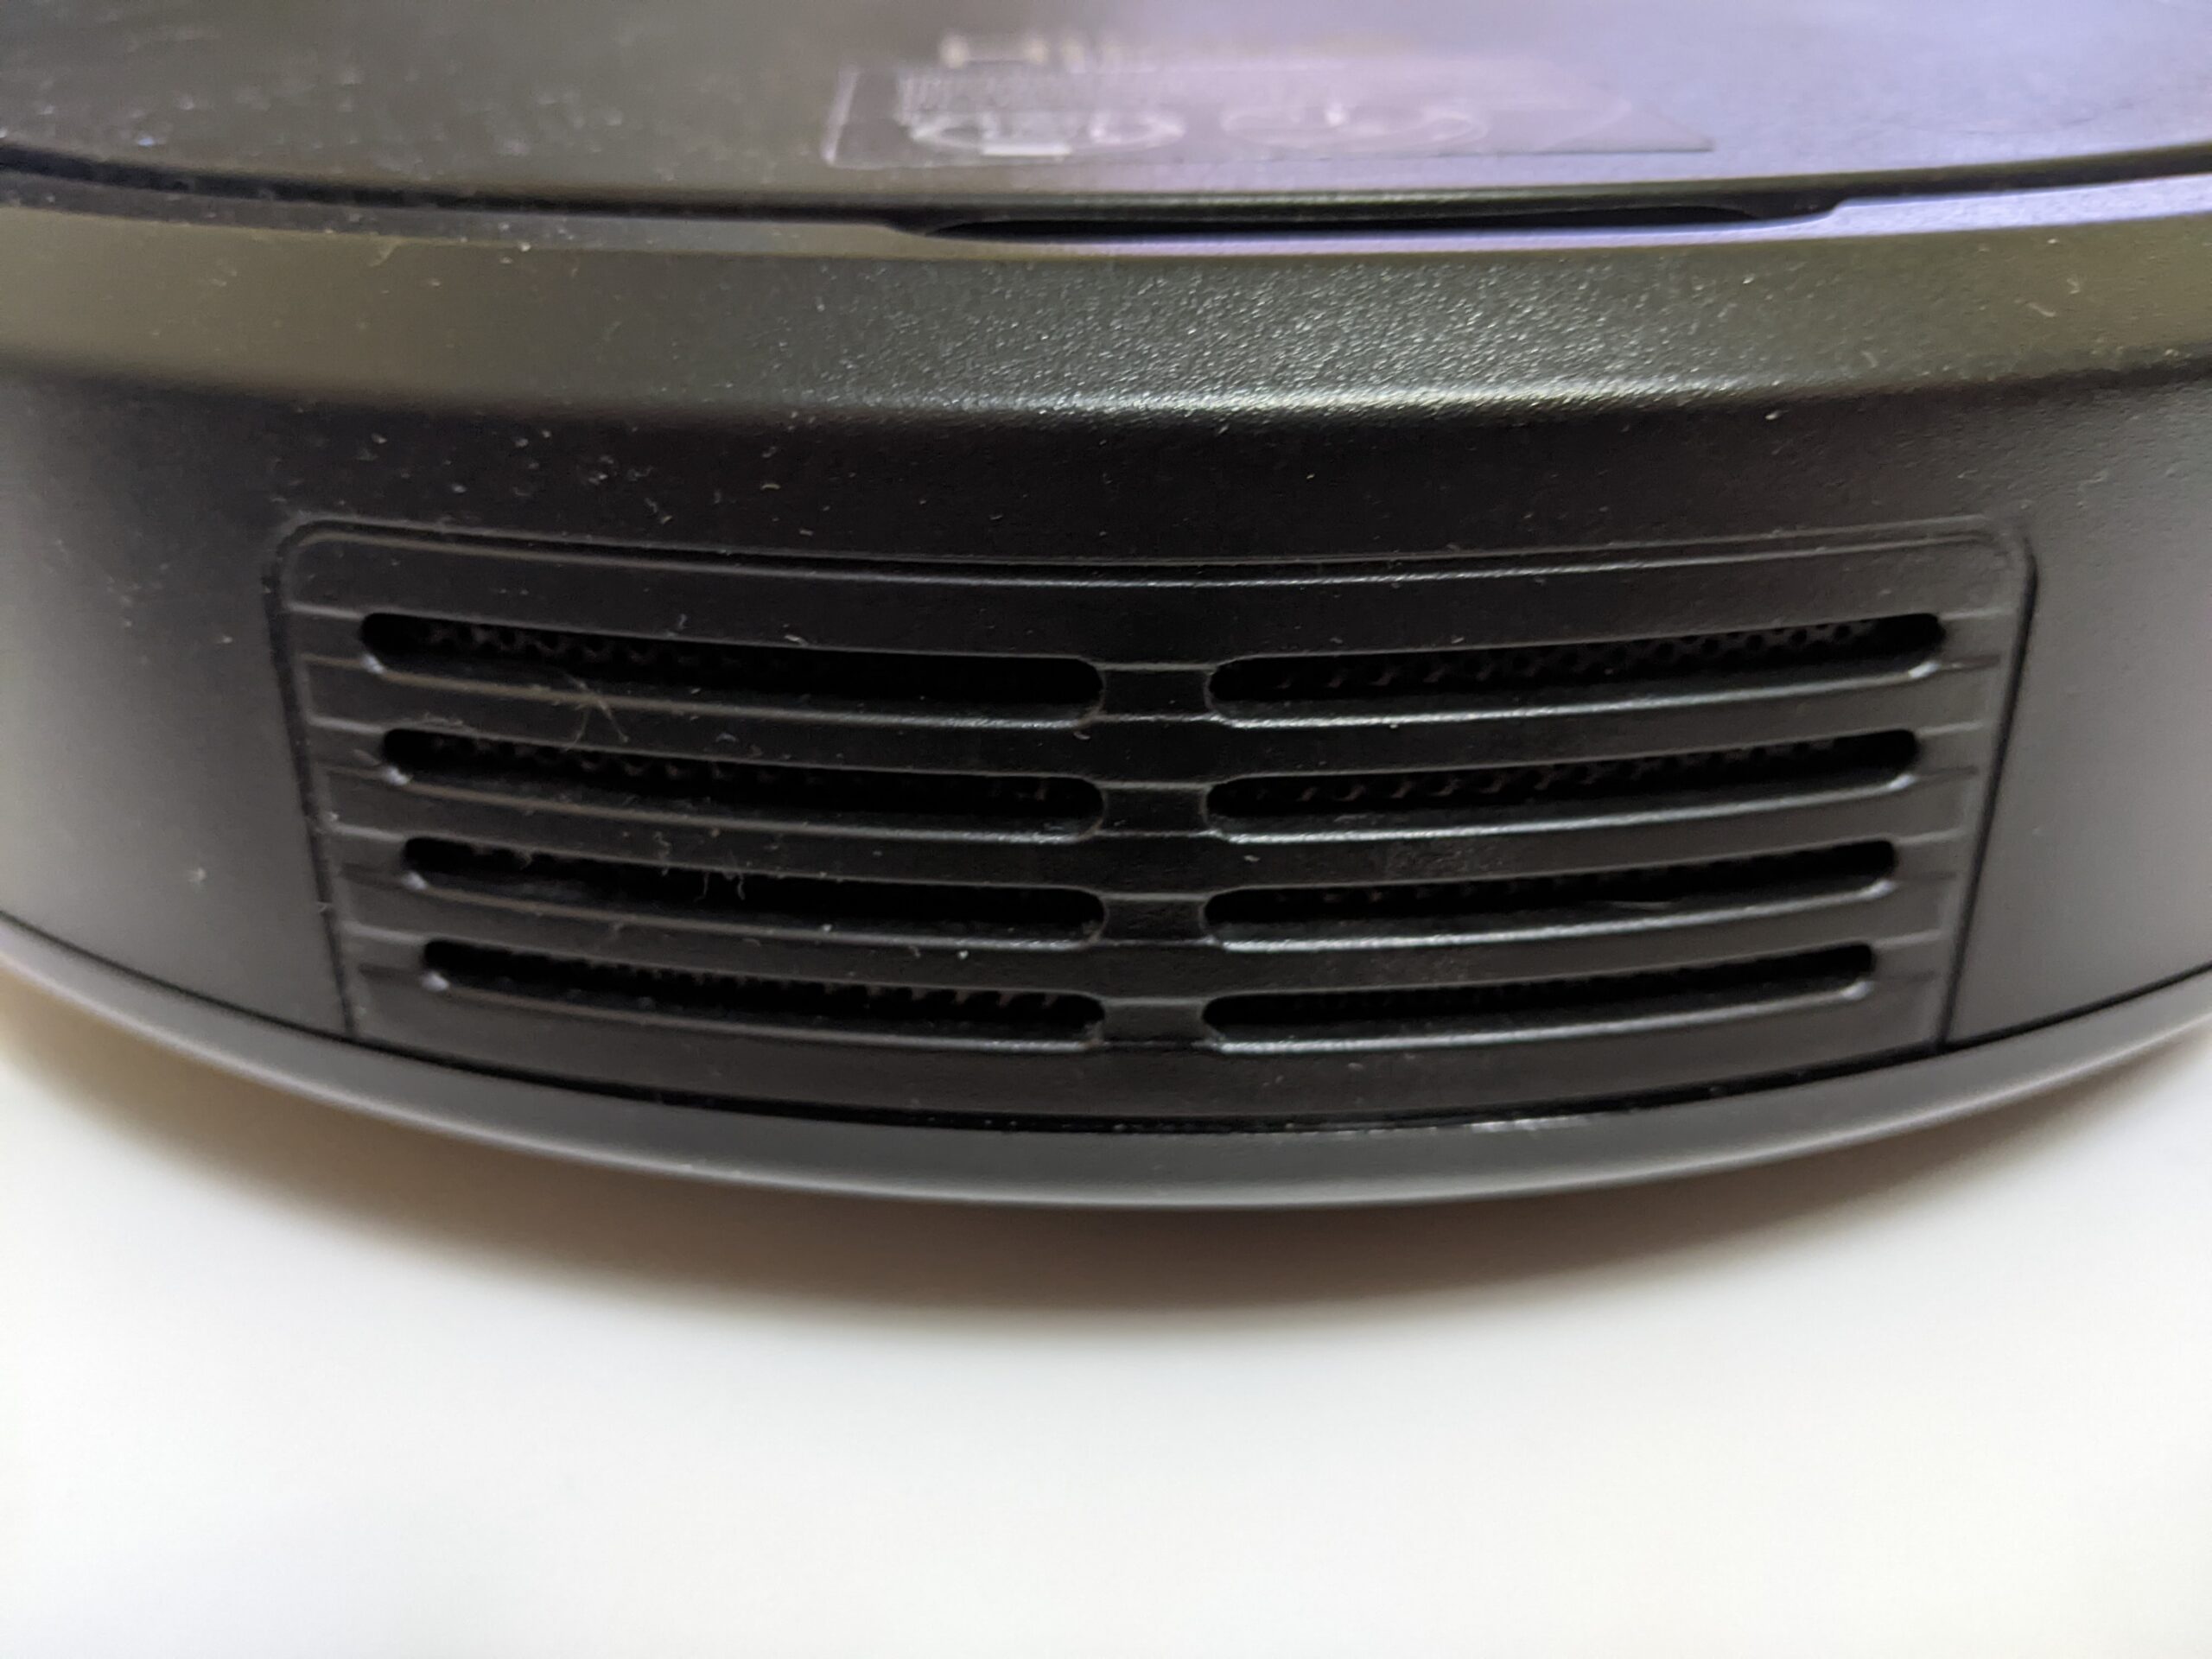 Rear grills where air is expelled